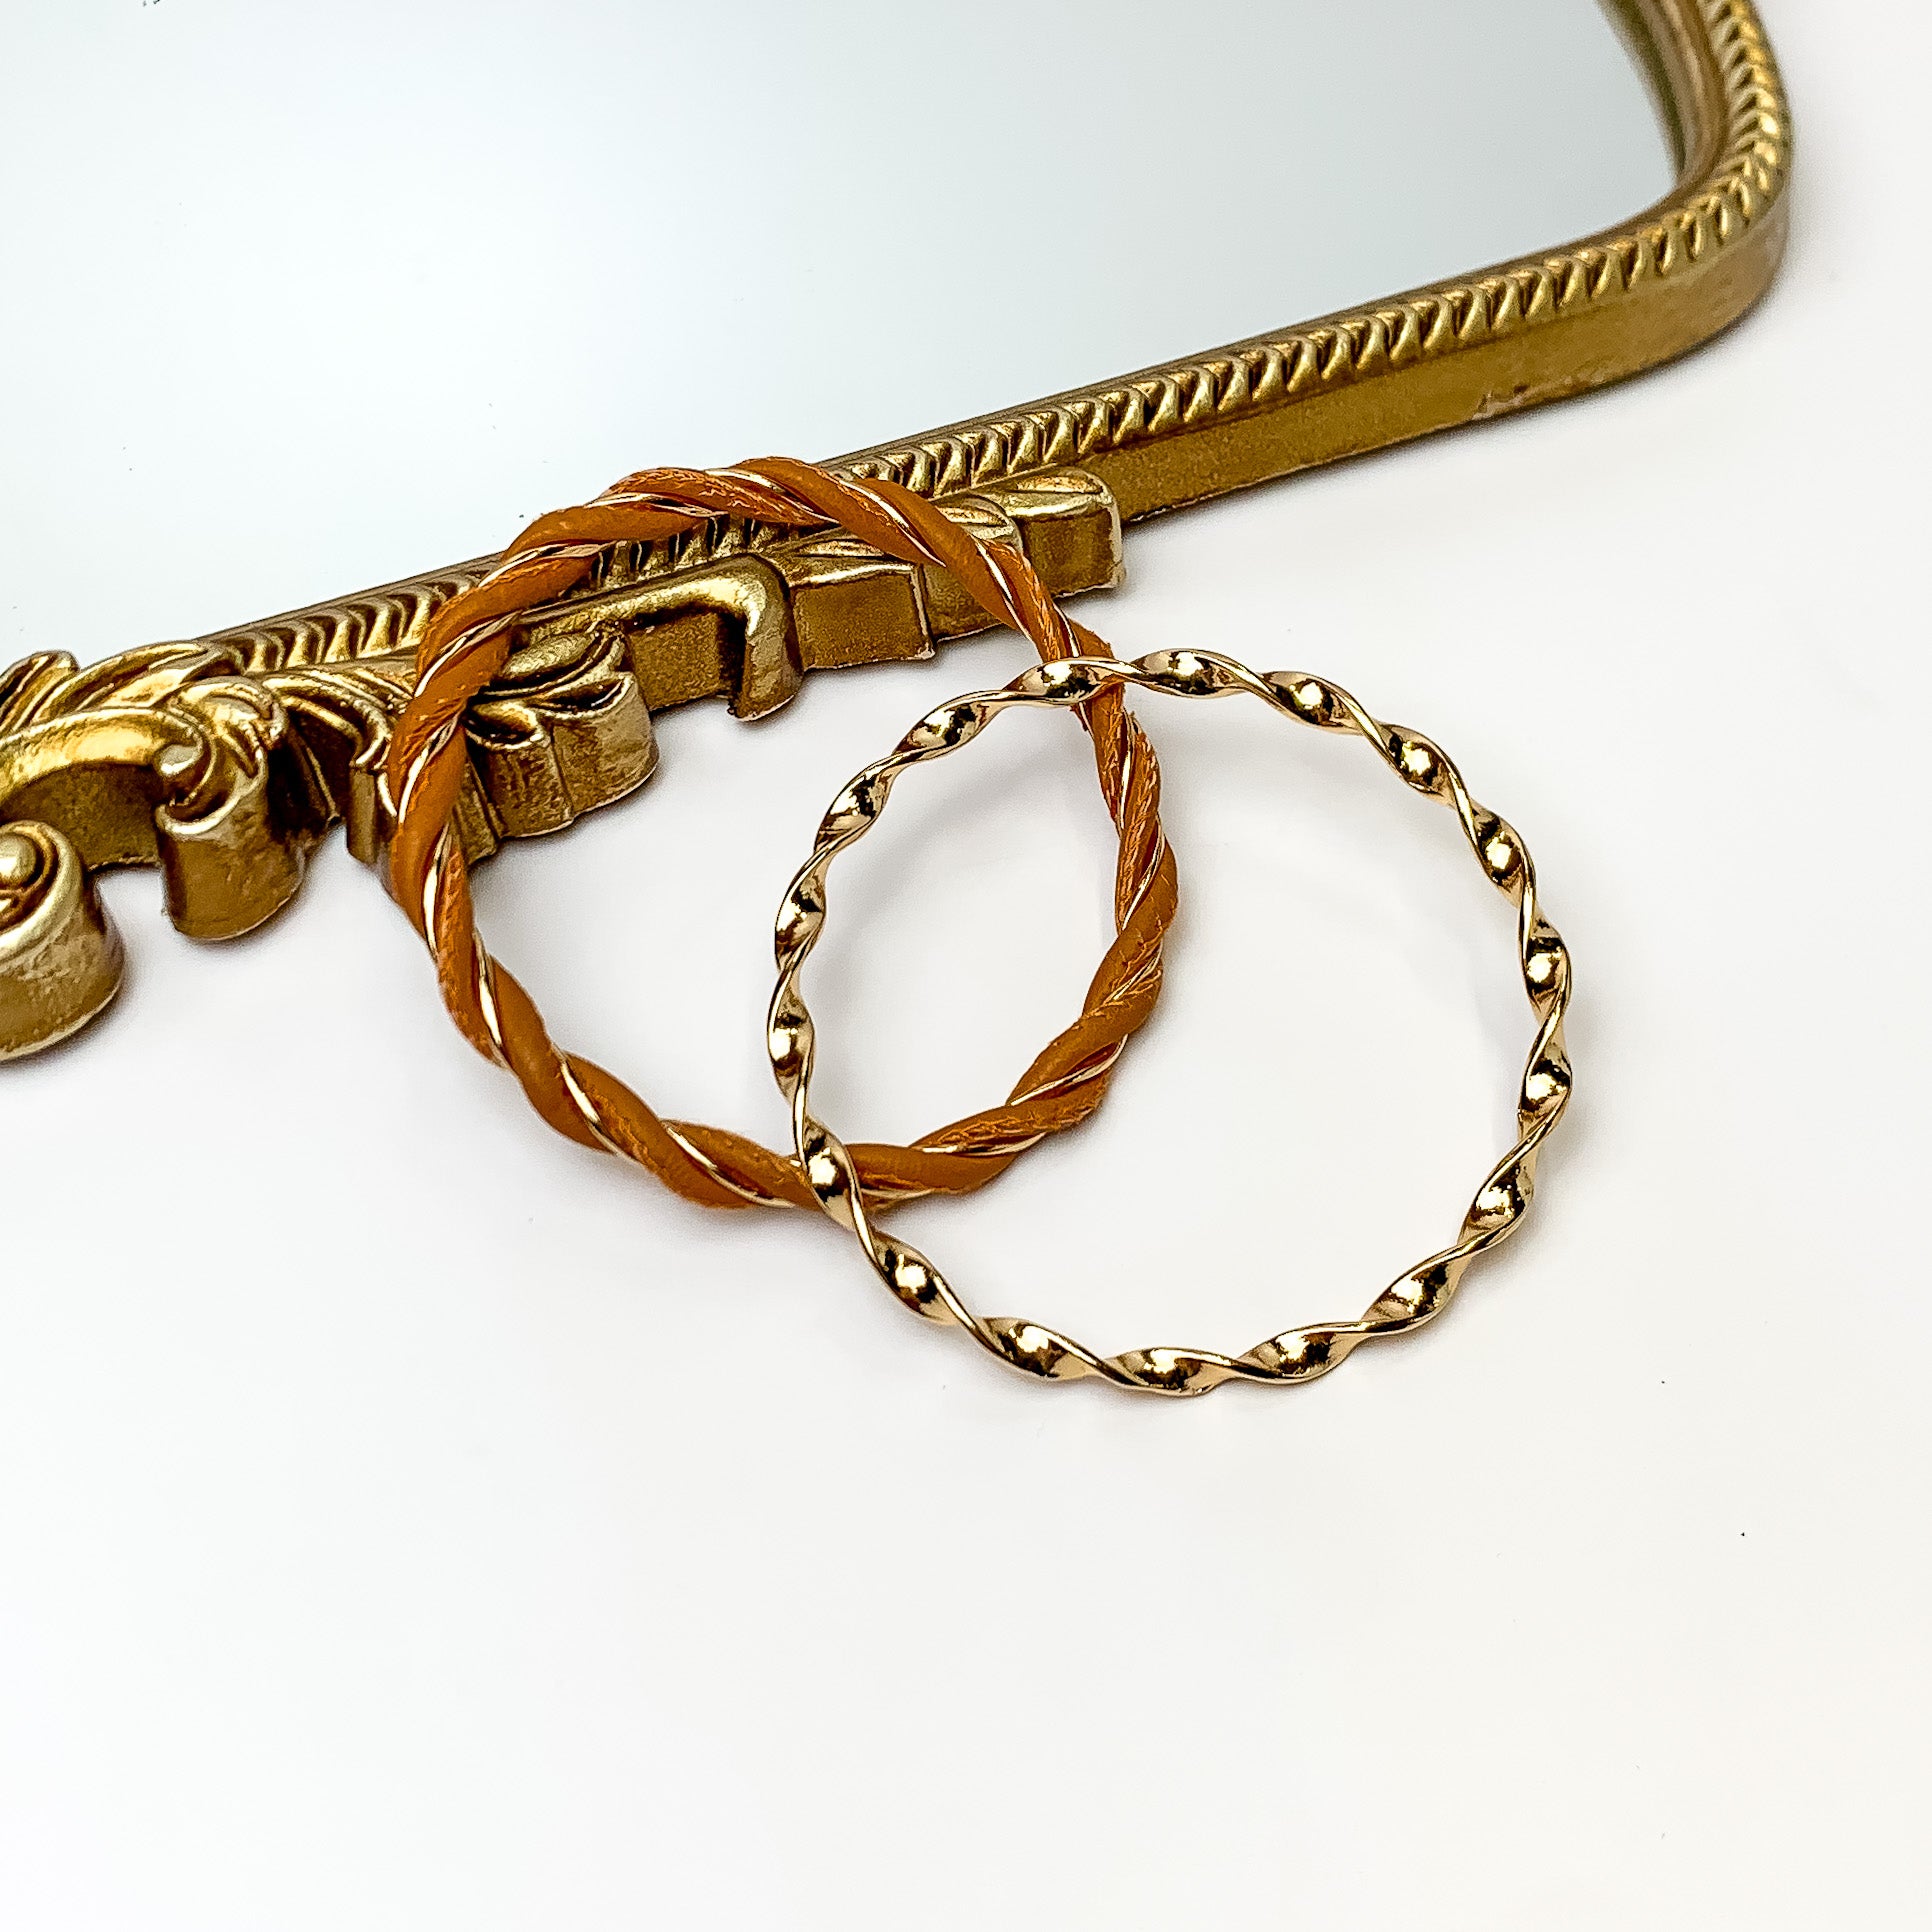 Pictured is a gold twist bangle and gold and tan twist bangle. These bangles are pictured partially leaning on a gold mirror on a white background. 